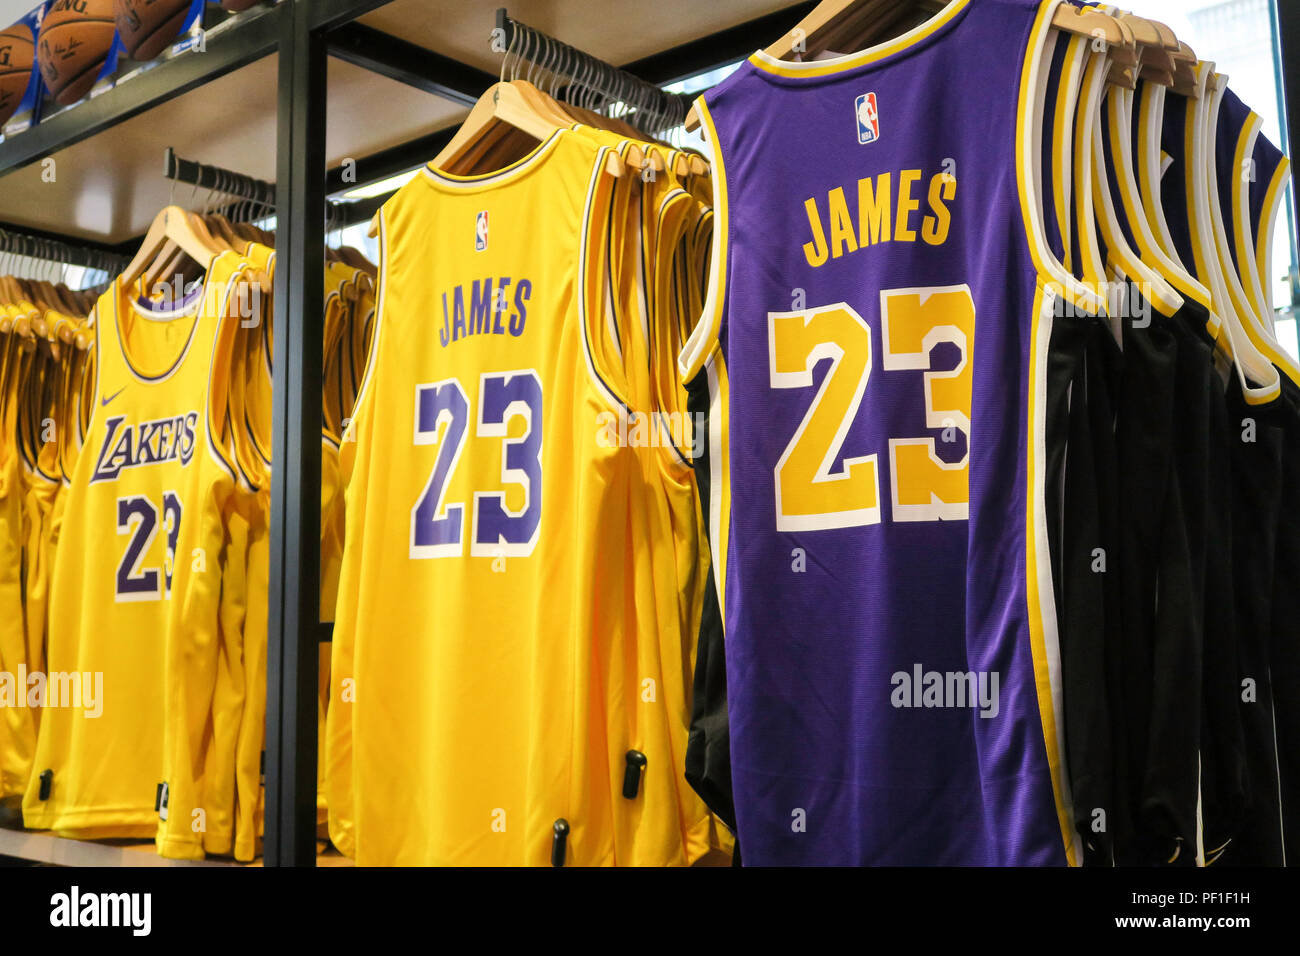 Lebron James and Lakers Branded Merchandise at the NBA Store on